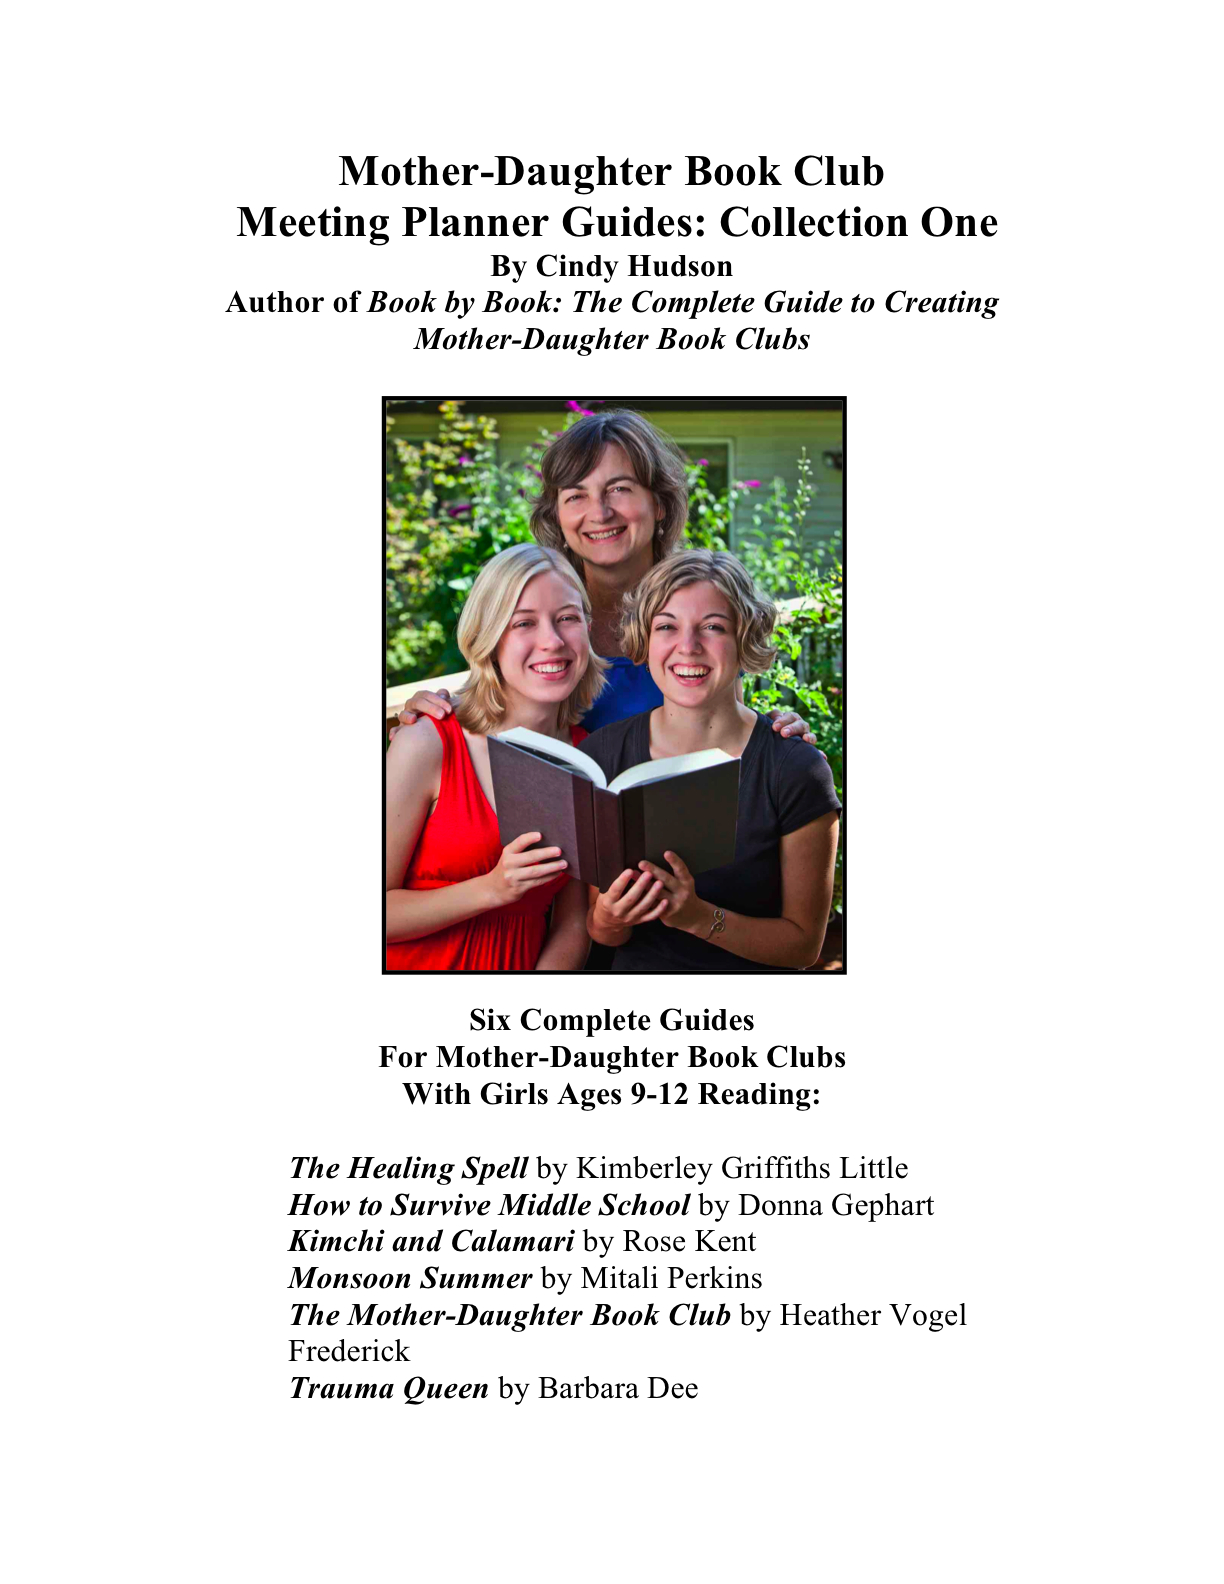 Mother-Daughter Book Club Meeting Planner Guides: Collection One by Cindy Hudson